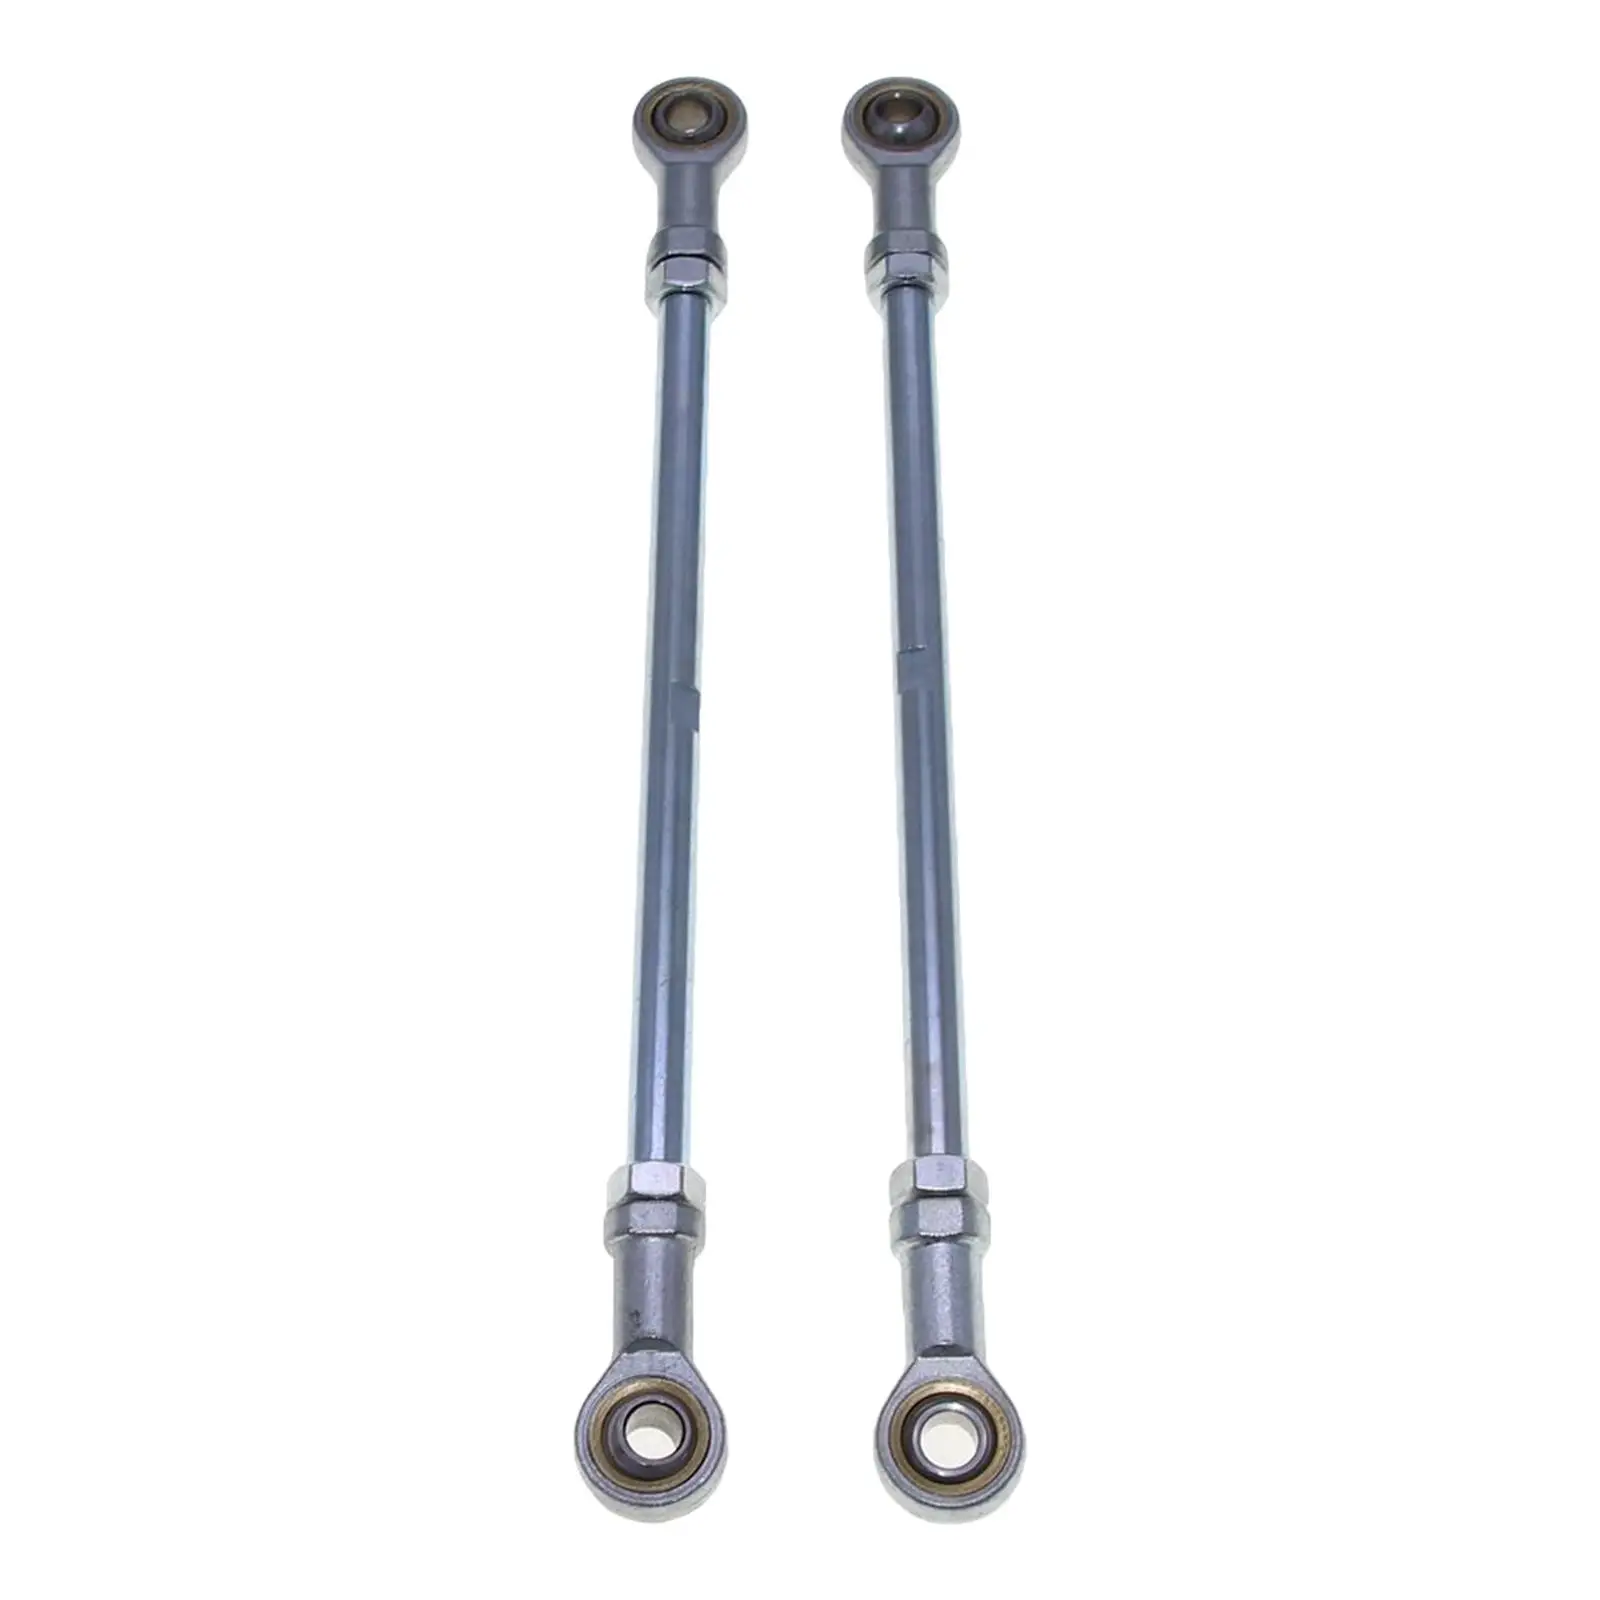 2 Pieces M10 Metal Bolt Tie Rod Ball Joiner Fit for 168 Go Kart ATV Karting